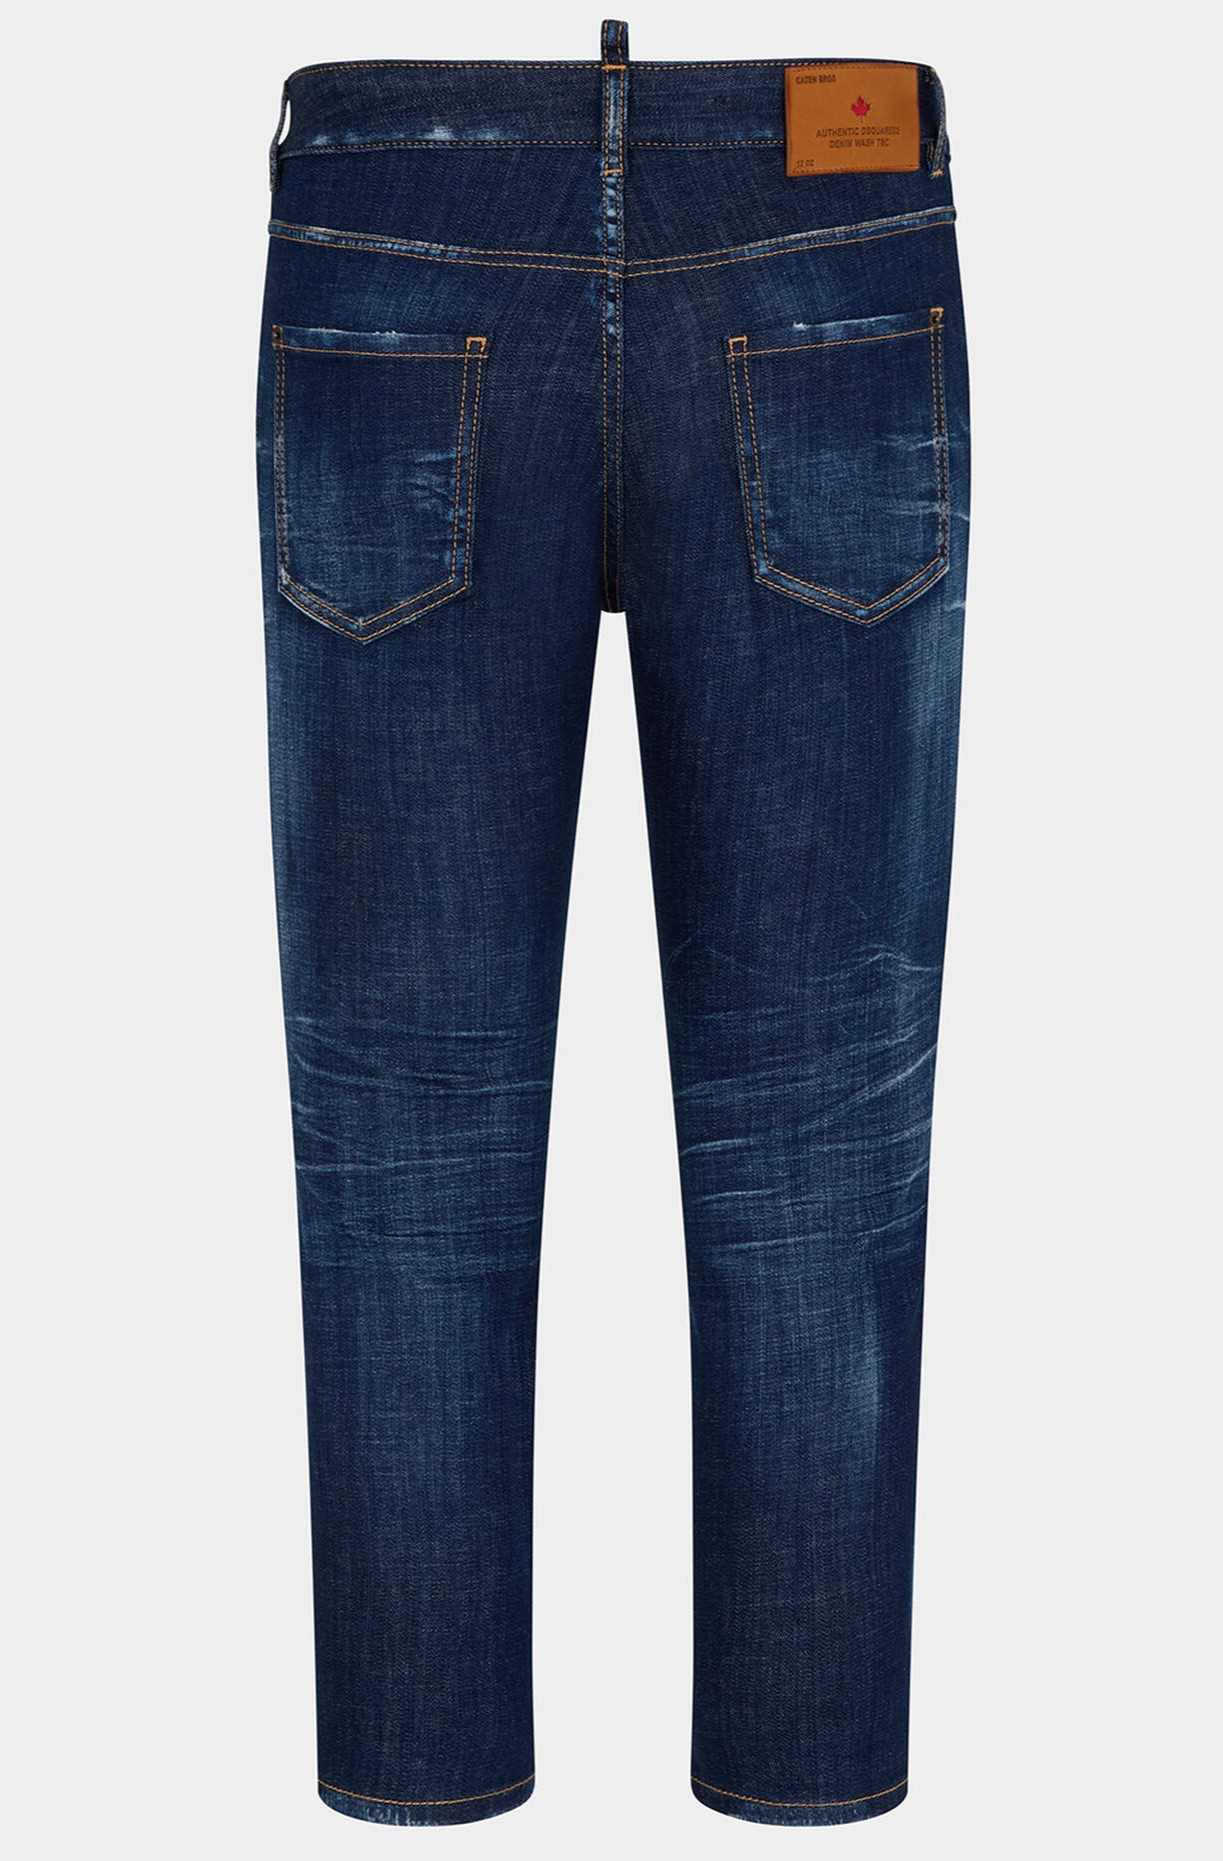 DSQUARED2 Cool Girl Cropped Jeans in Washed Dark Blue